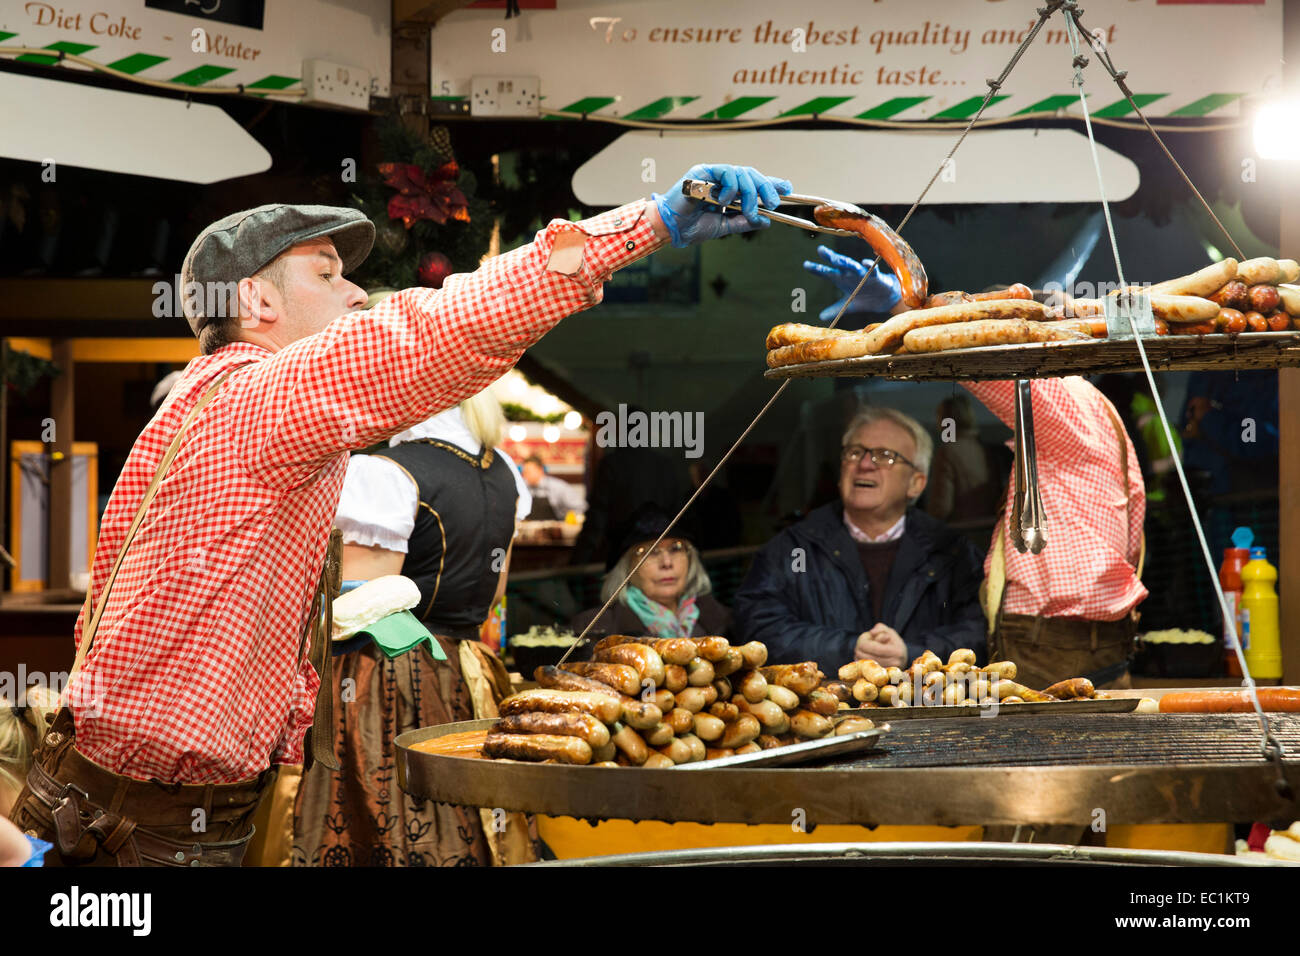 A stall in Lincoln Christmas market selling sausages Stock Photo